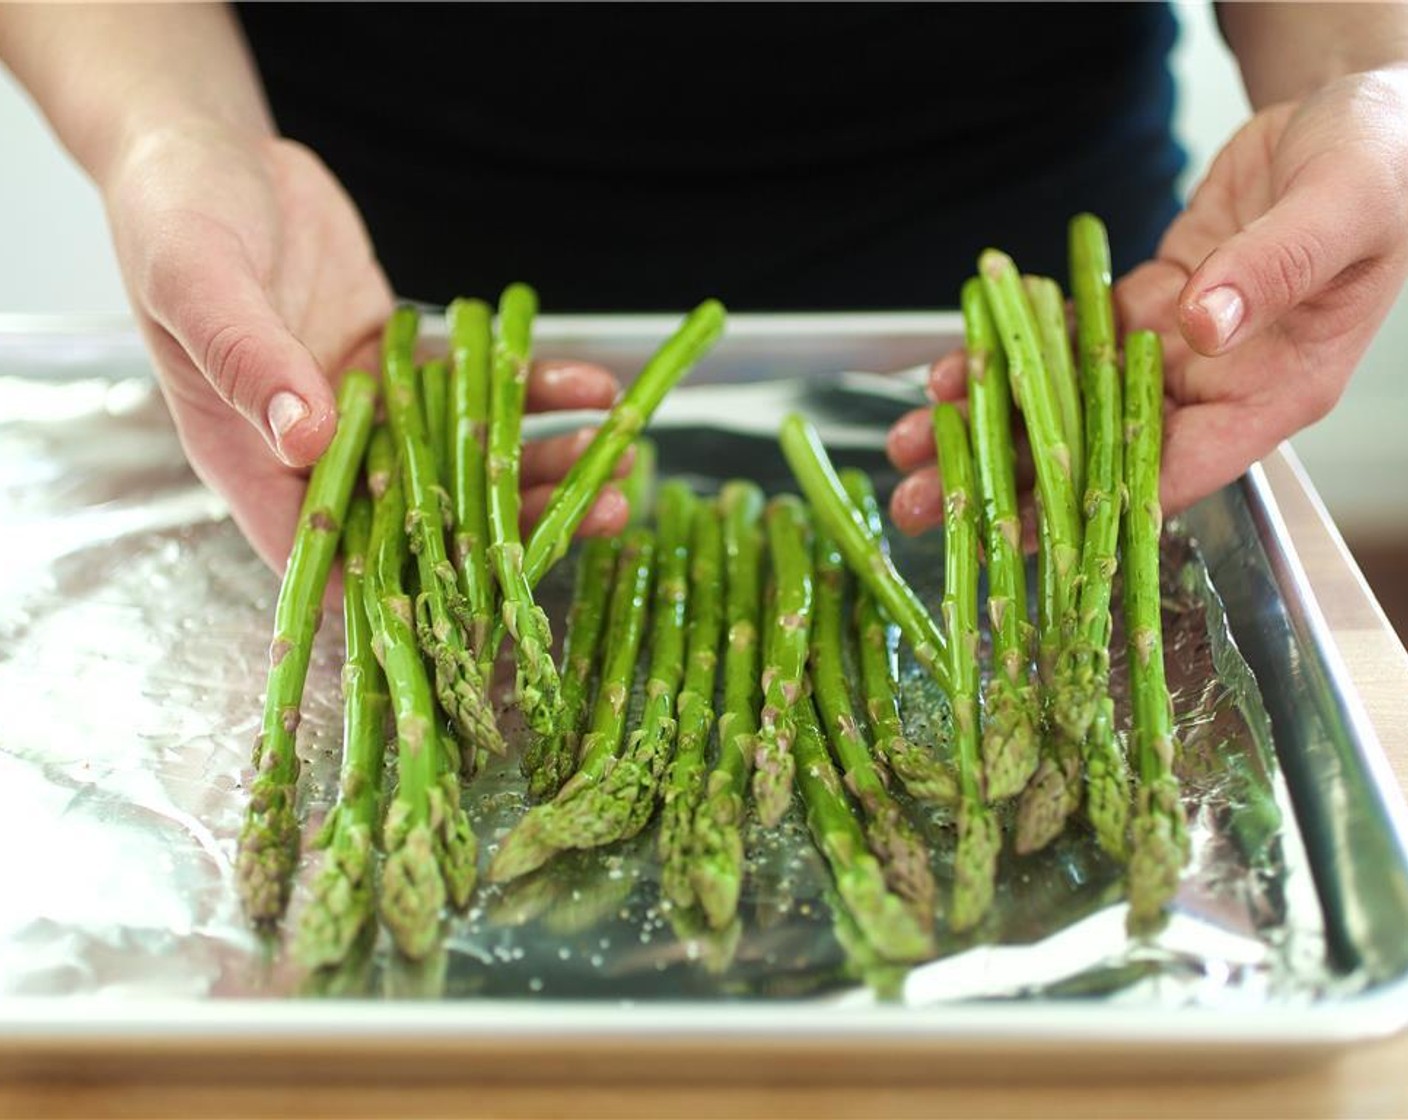 step 6 Place the asparagus in a single layer on half of a sheet pan, leaving room for the salmon. Drizzle the asparagus with Olive Oil (1 tsp), Salt (1/4 tsp) and Ground Black Pepper (1/4 tsp). Hold for next step.